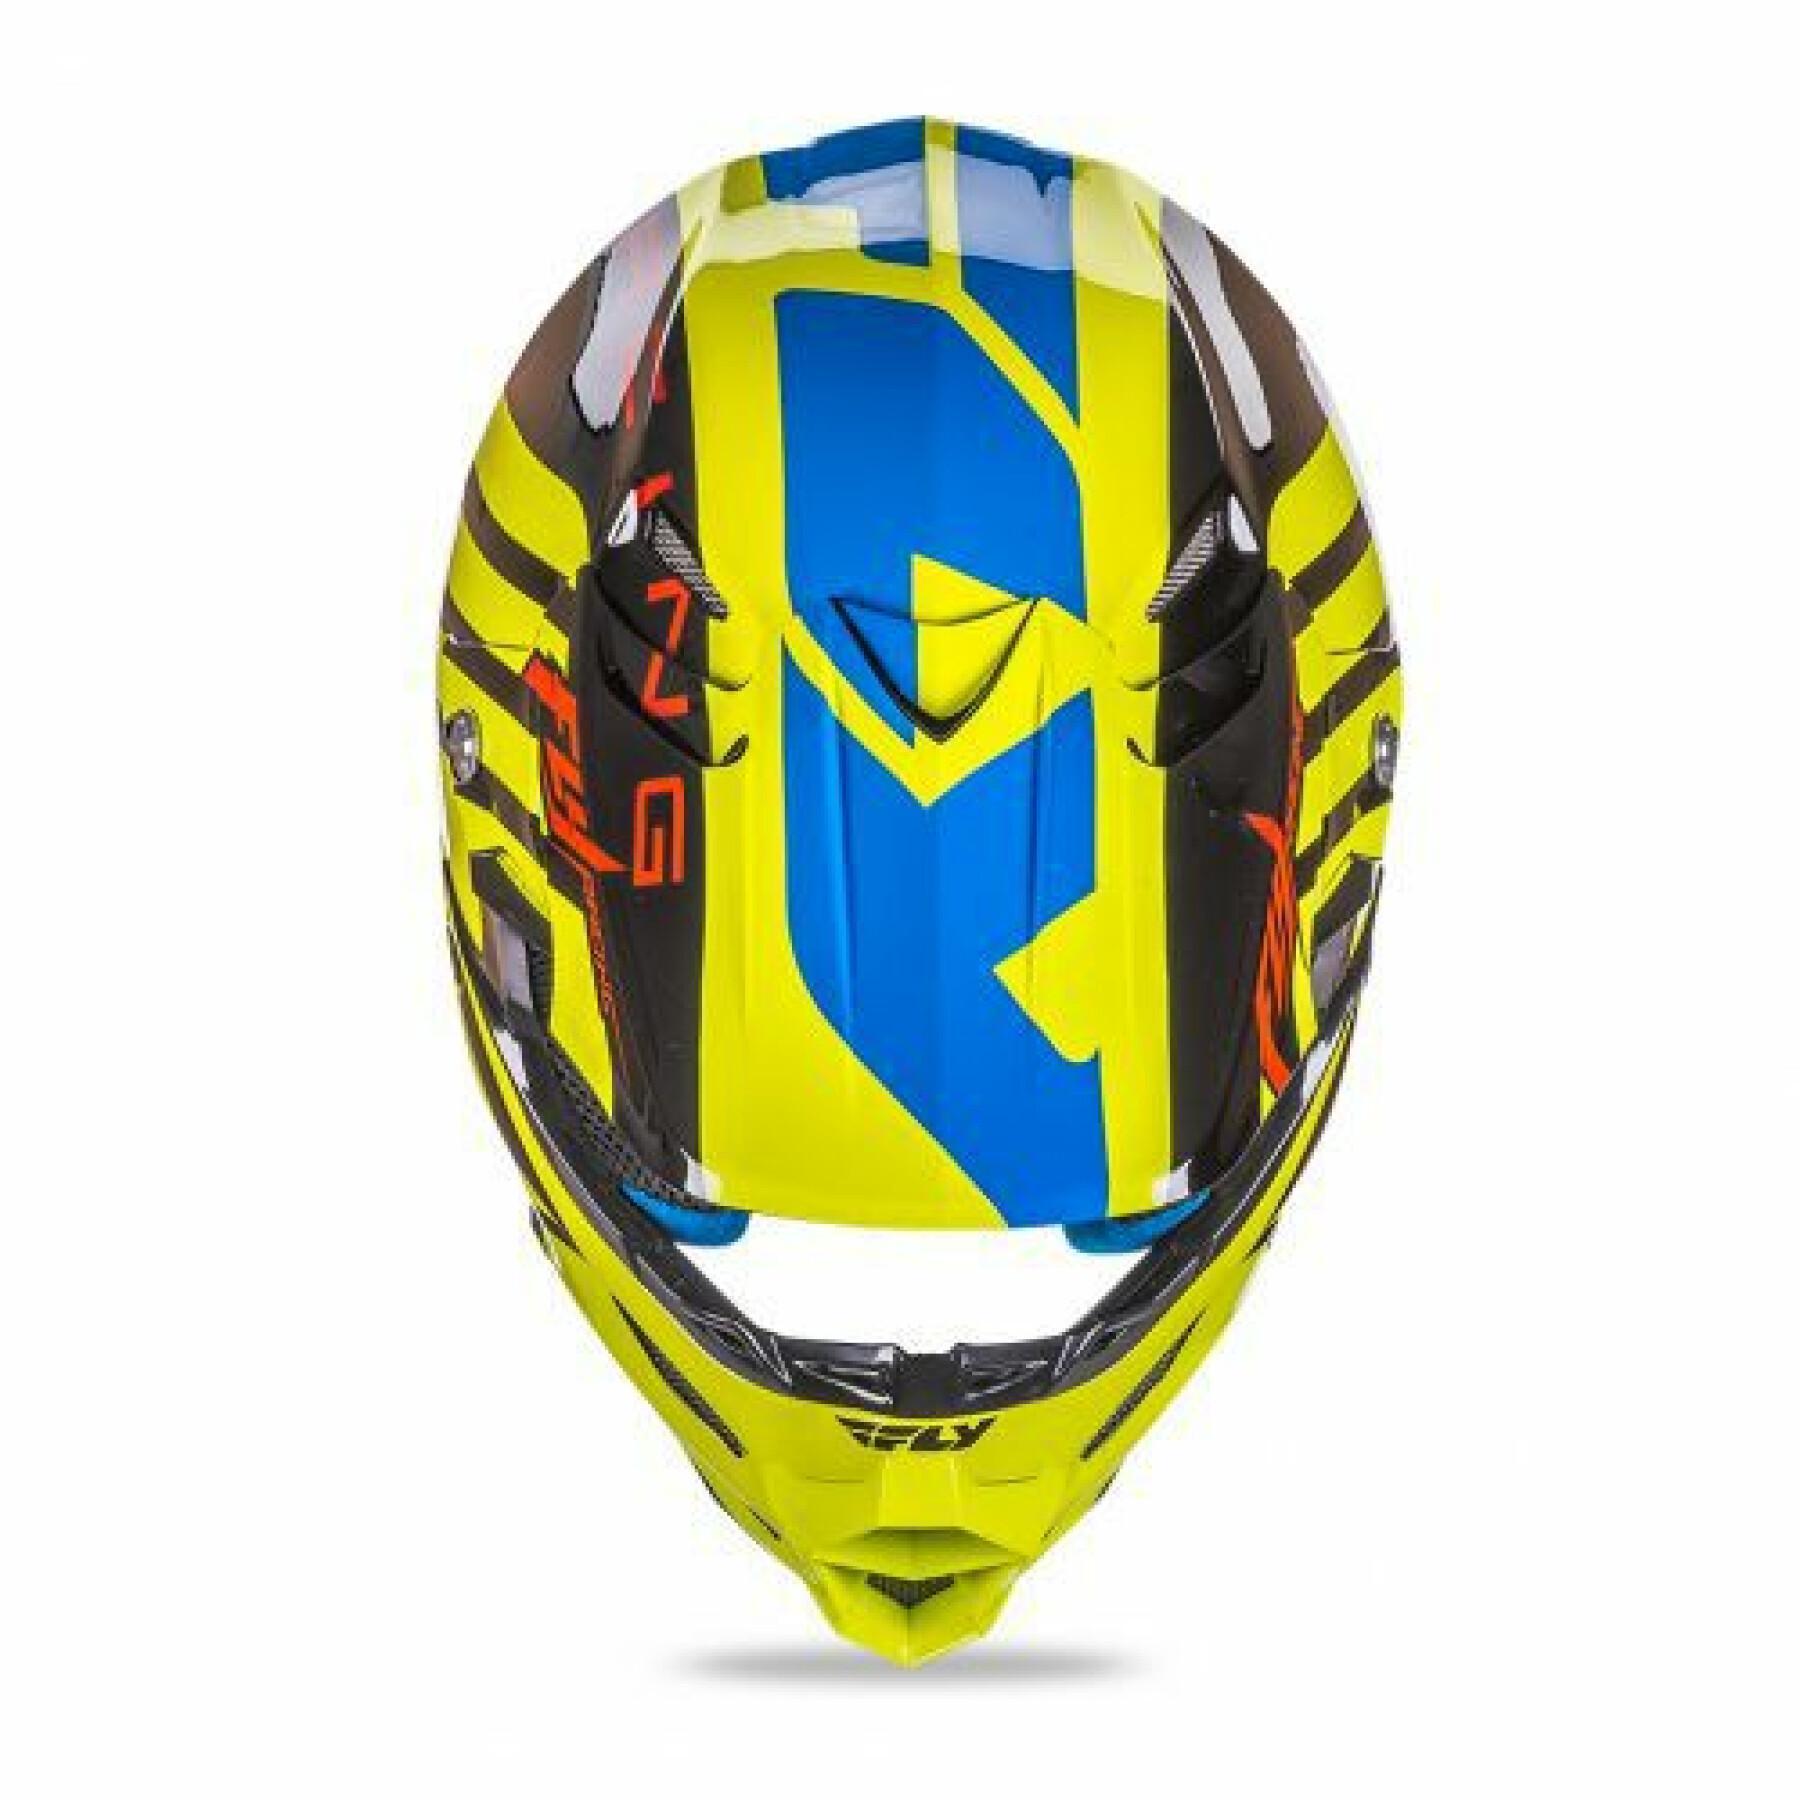 Headset Fly Racing F2 Carbon Replica Weston Peick 2017